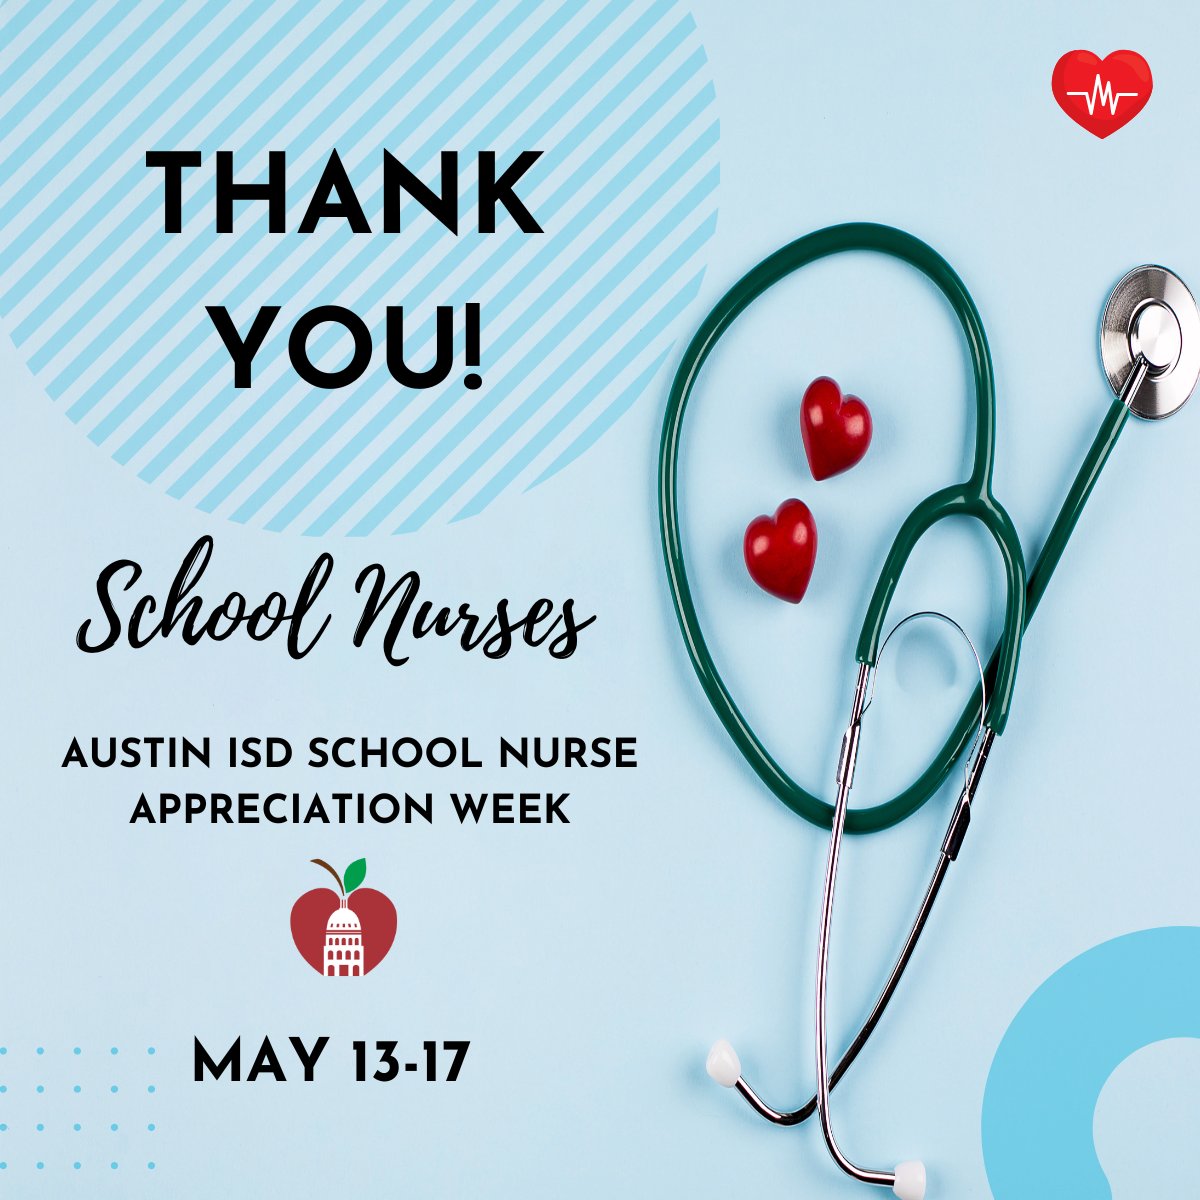 Celebrating National School Nurse Appreciation Week continues @AustinISD ! We're extending our gratitude from May 8-10 to this entire week, May 13-17, because our wonderful nurses deserve more than just a few days of thanks. Join us in showing appreciation for their dedication.❤️